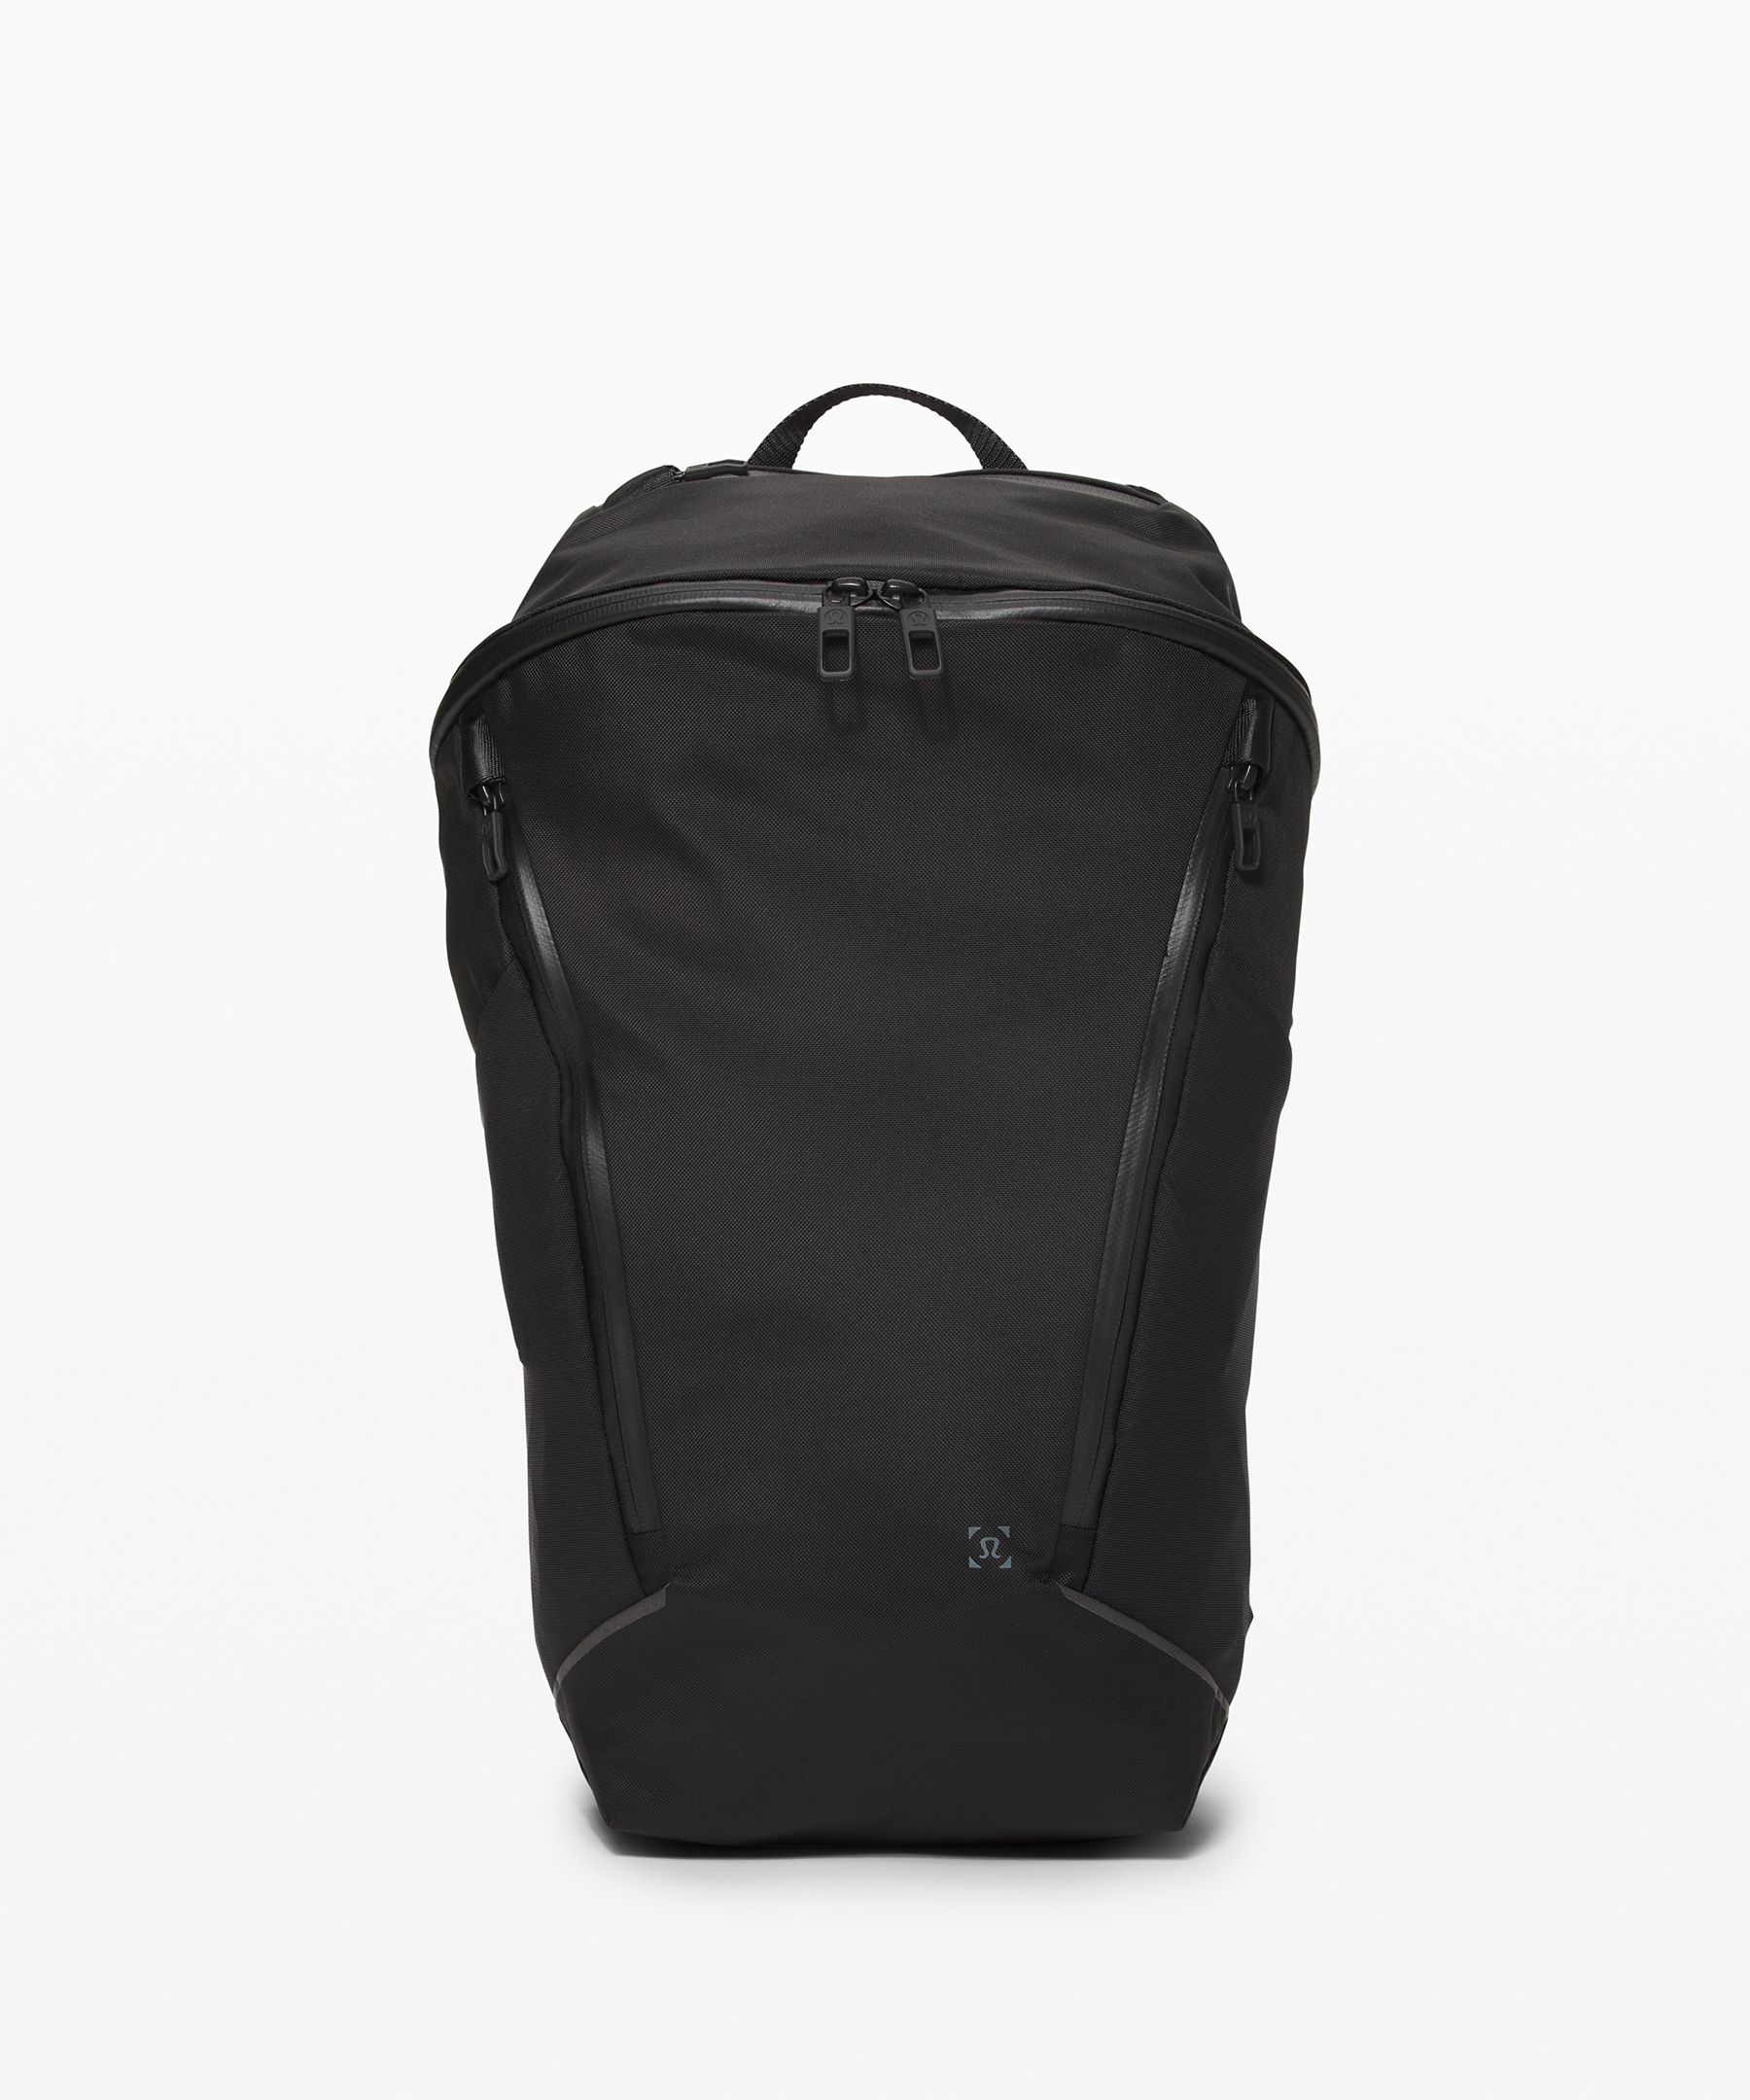 Lululemon On The Move Backpack Reviewed